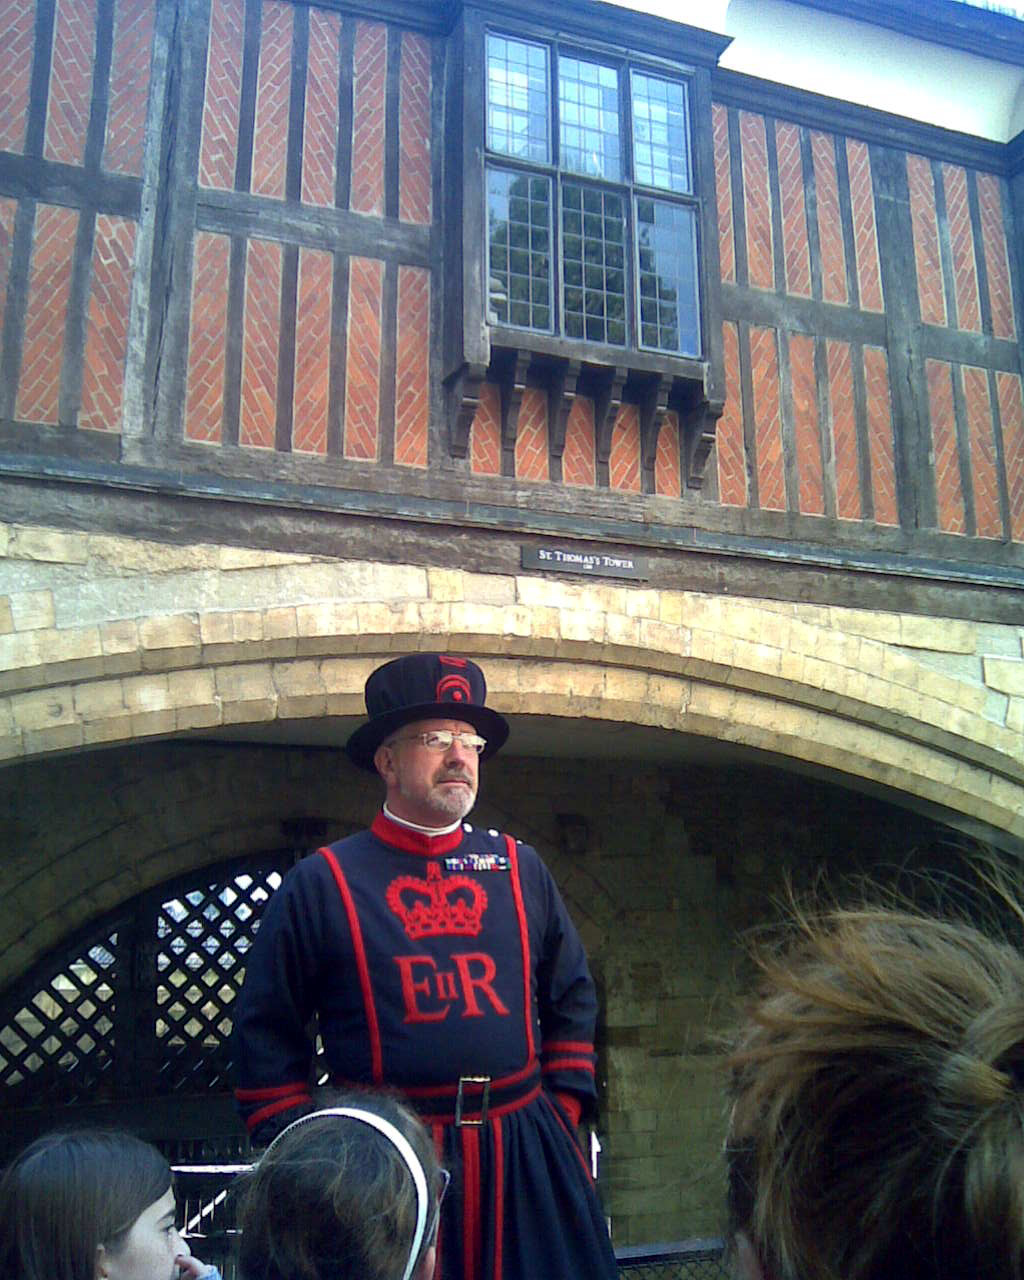 Beefeater 4